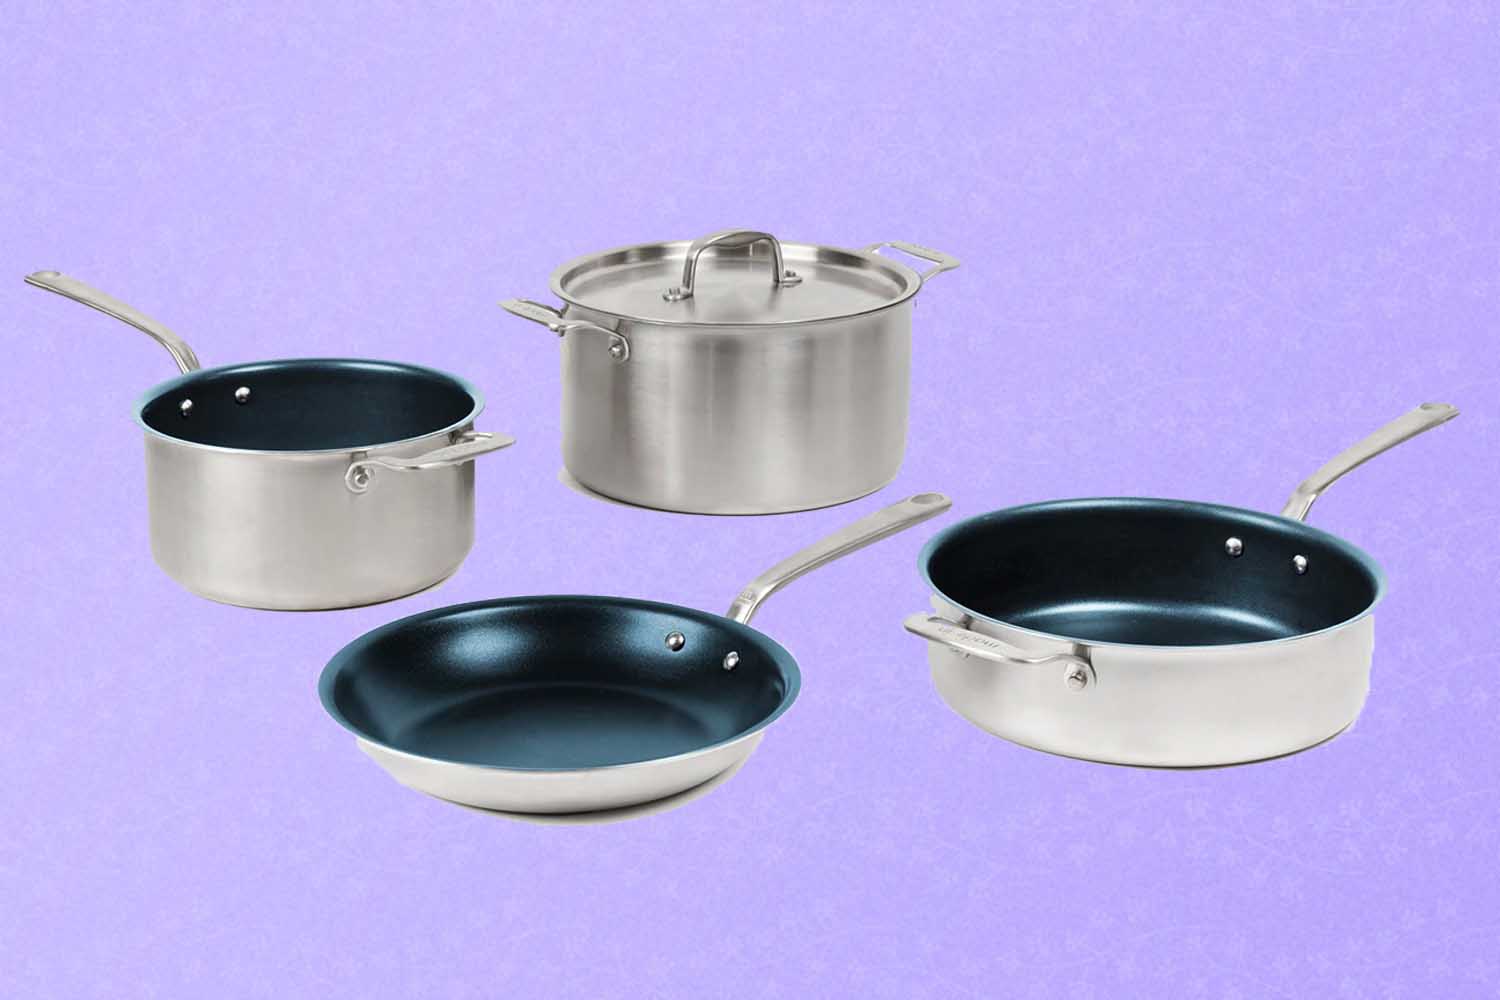 Four non-stick pieces of cookware, a perfect Mother's Day gift for 2022, on a purple background.